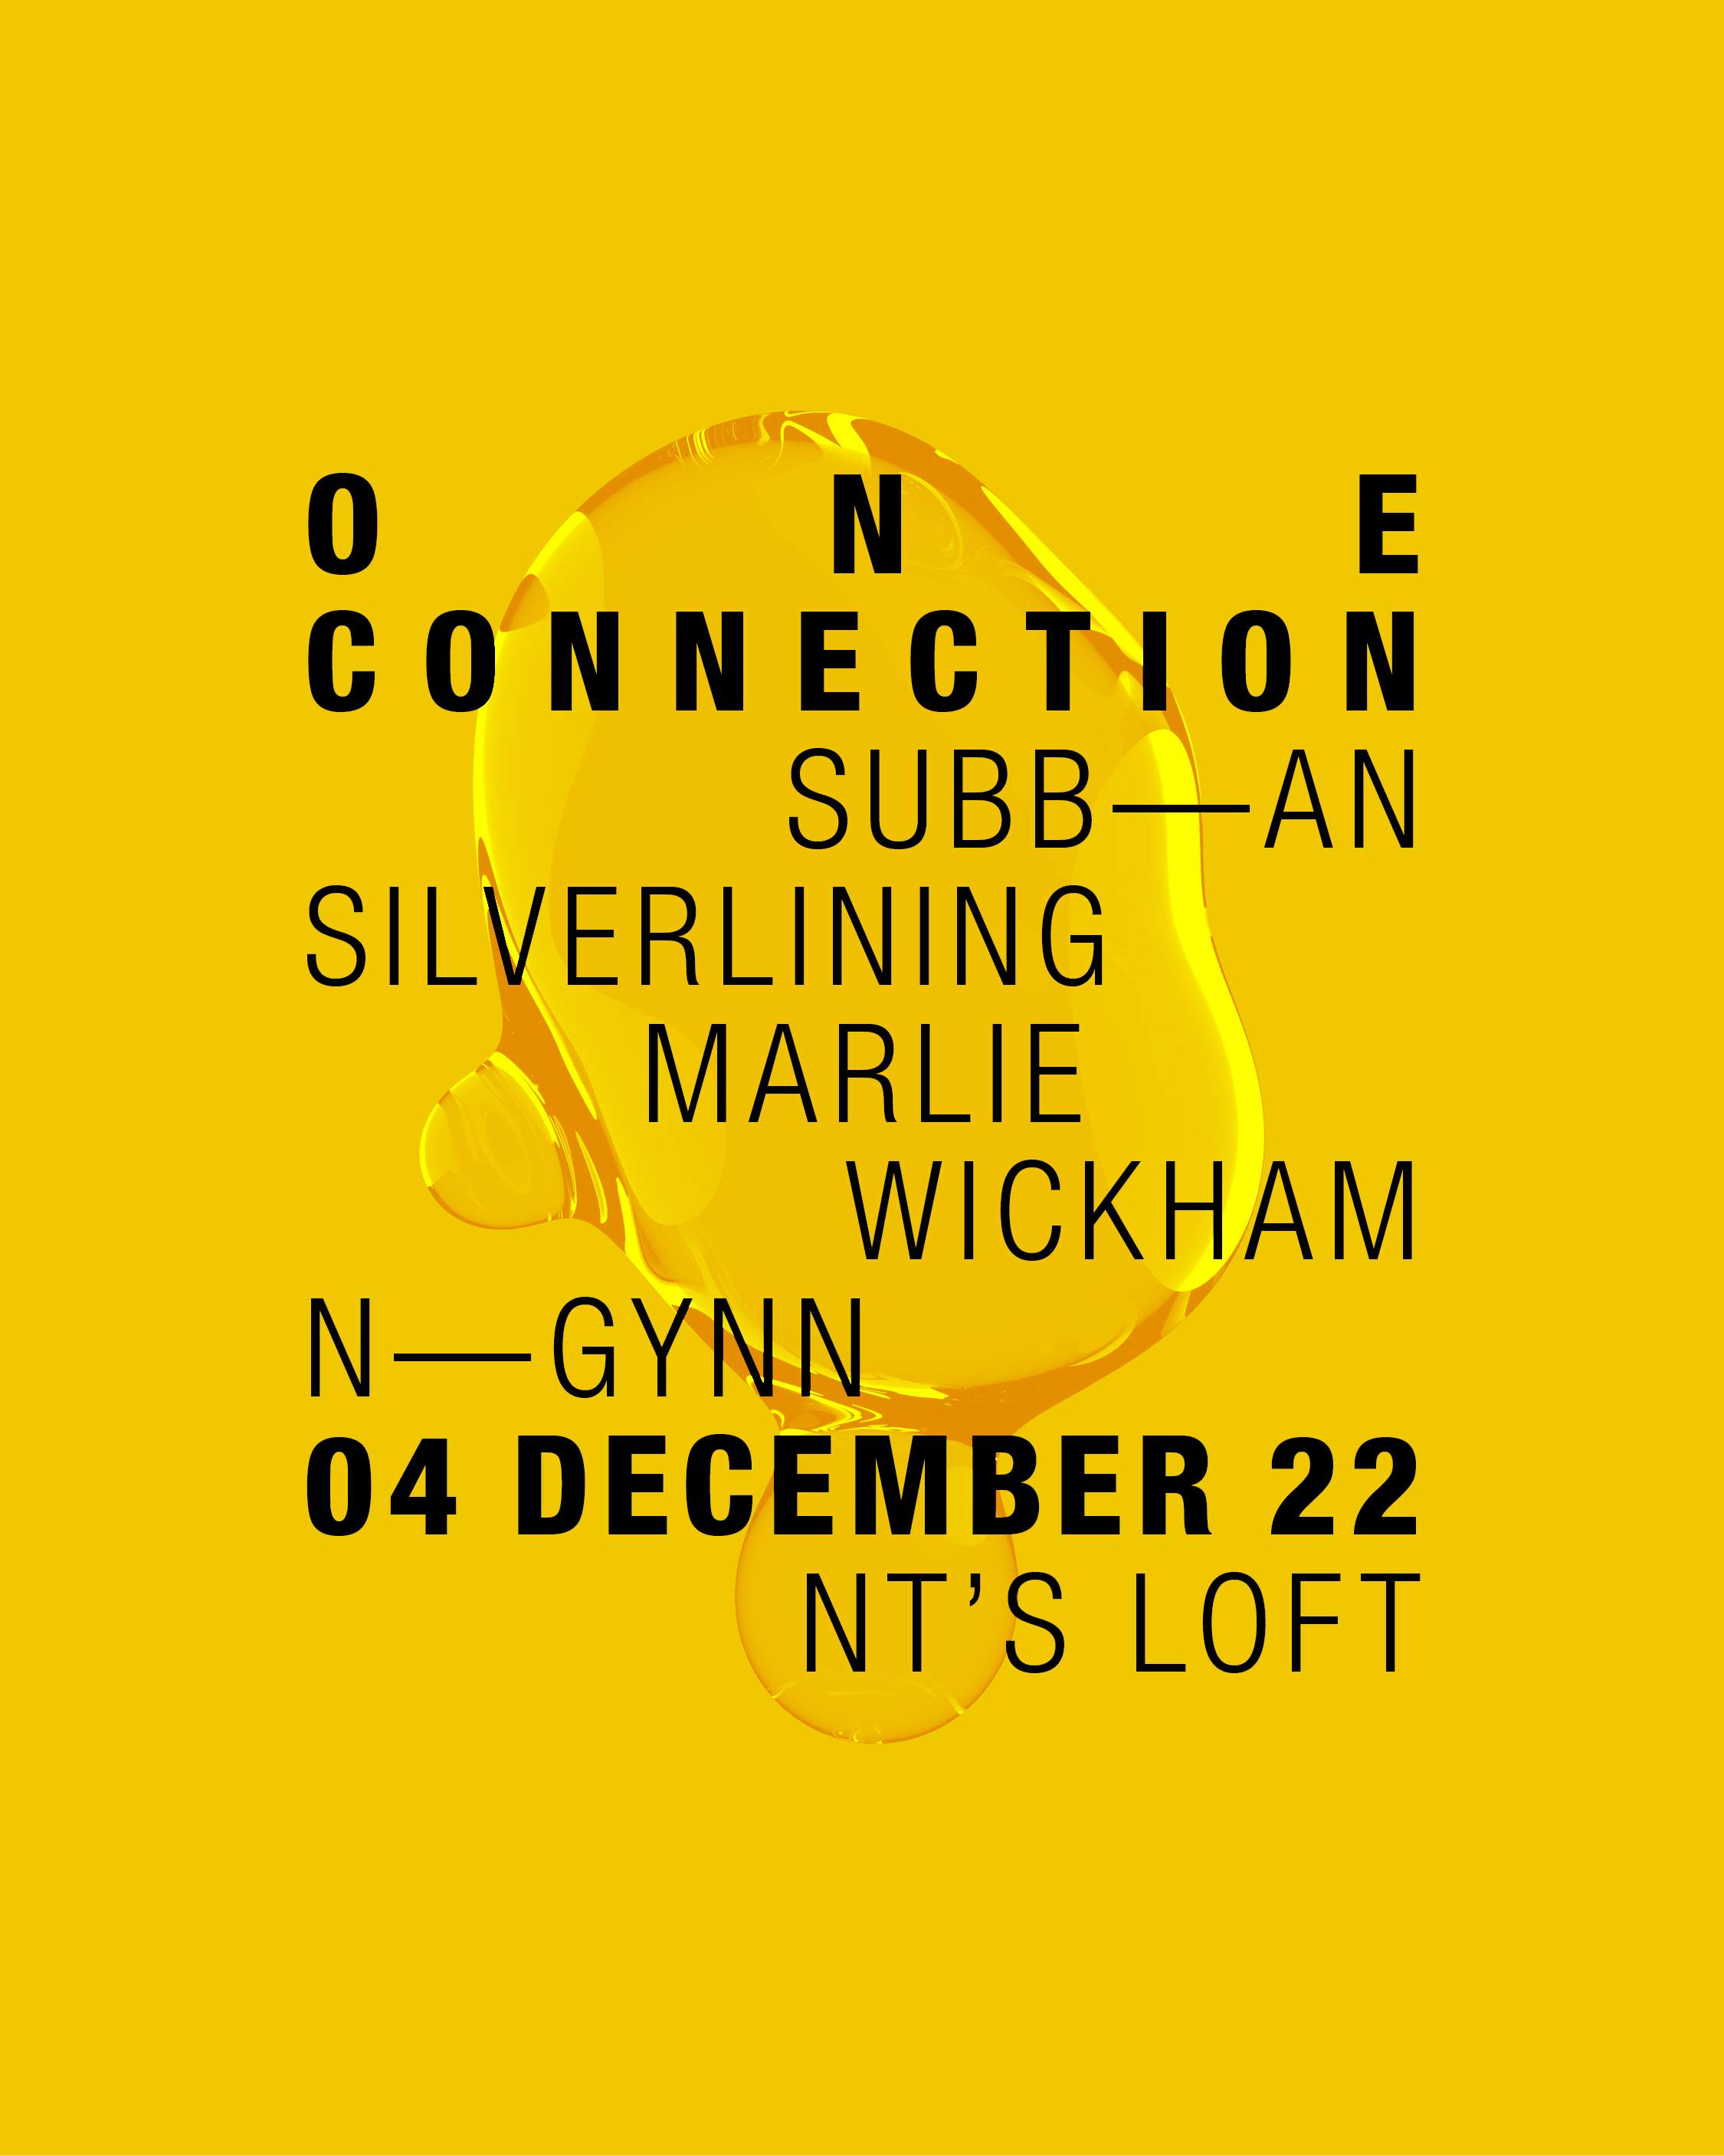 NT's Loft 7th Birthday: One Connection - Subb-an, Silverlining, Marlie - England Game Provided - フライヤー表